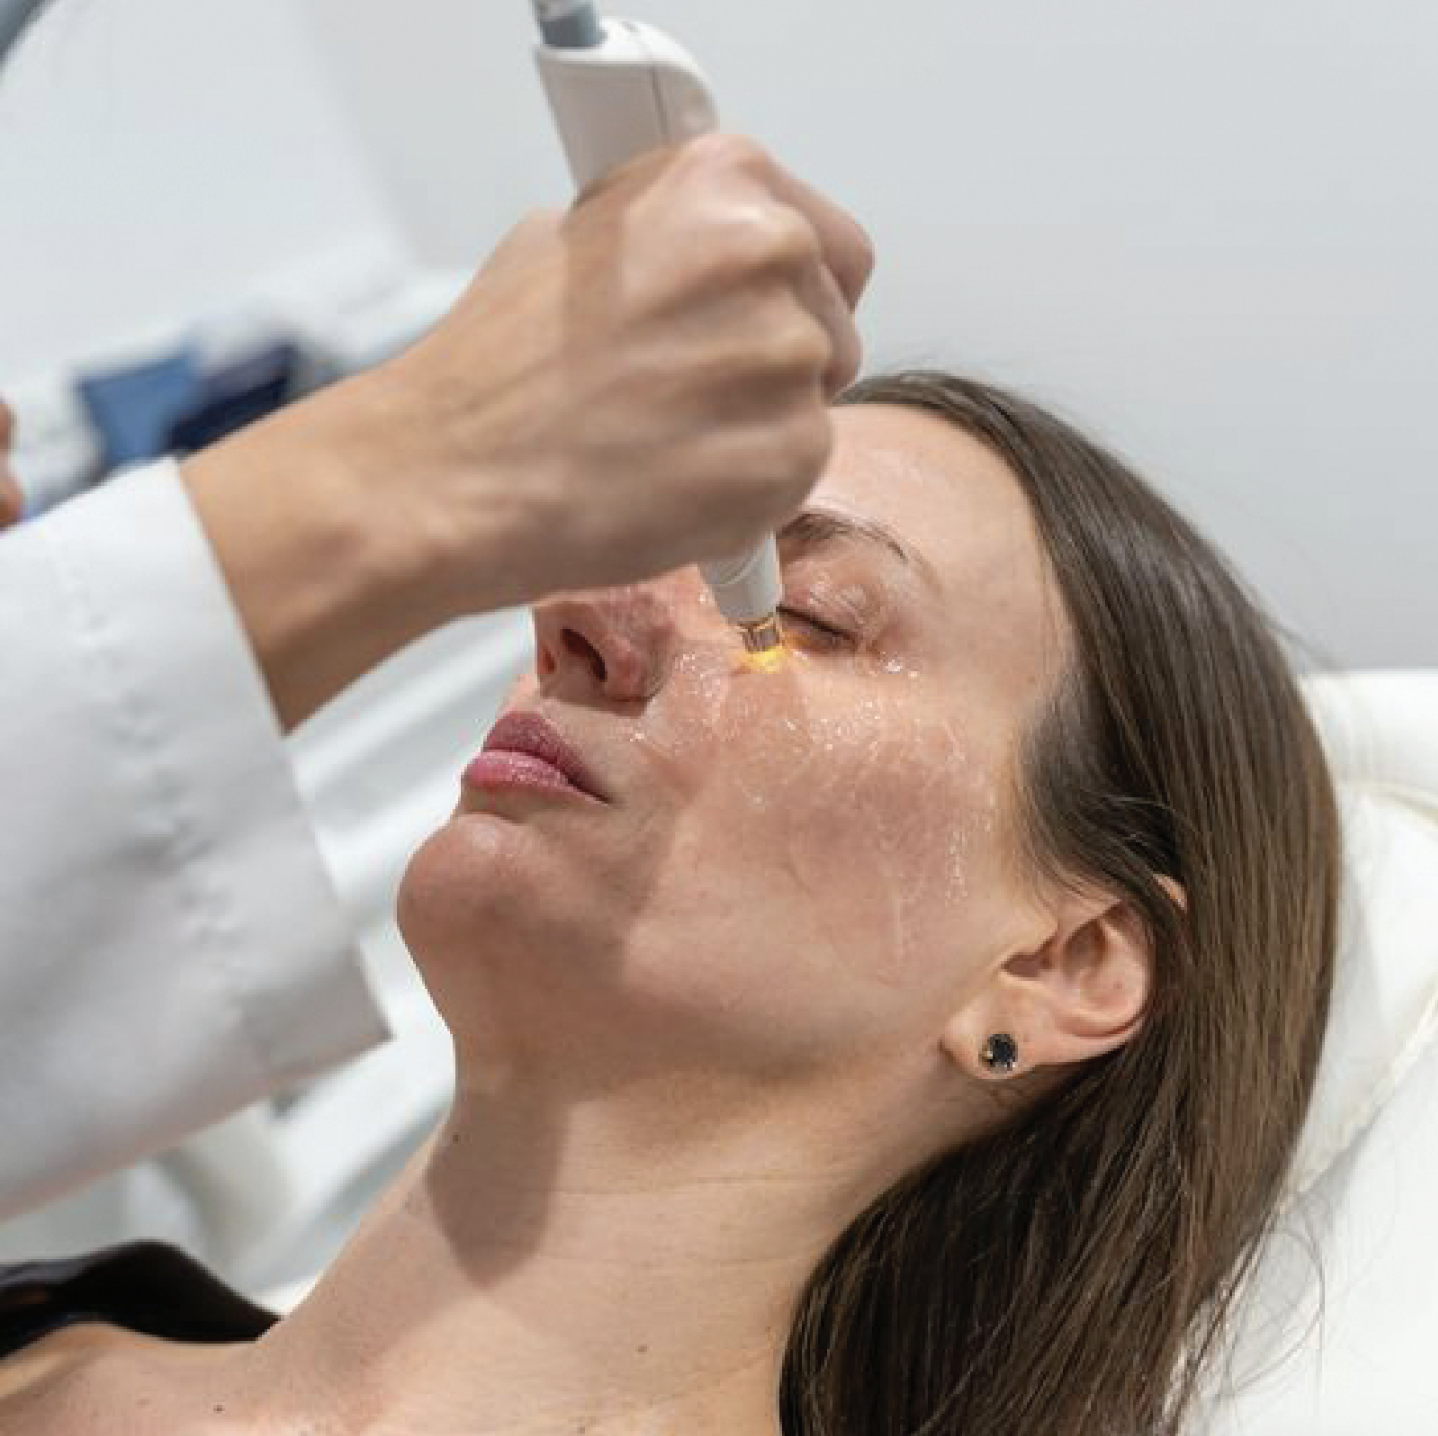 Although the scope of practice in South Dakota has not been updated in nearly 30 years, a new declaratory ruling will allow those with the proper training to perform intense pulsed light therapy on patients suffering from dry eye/MGD. 